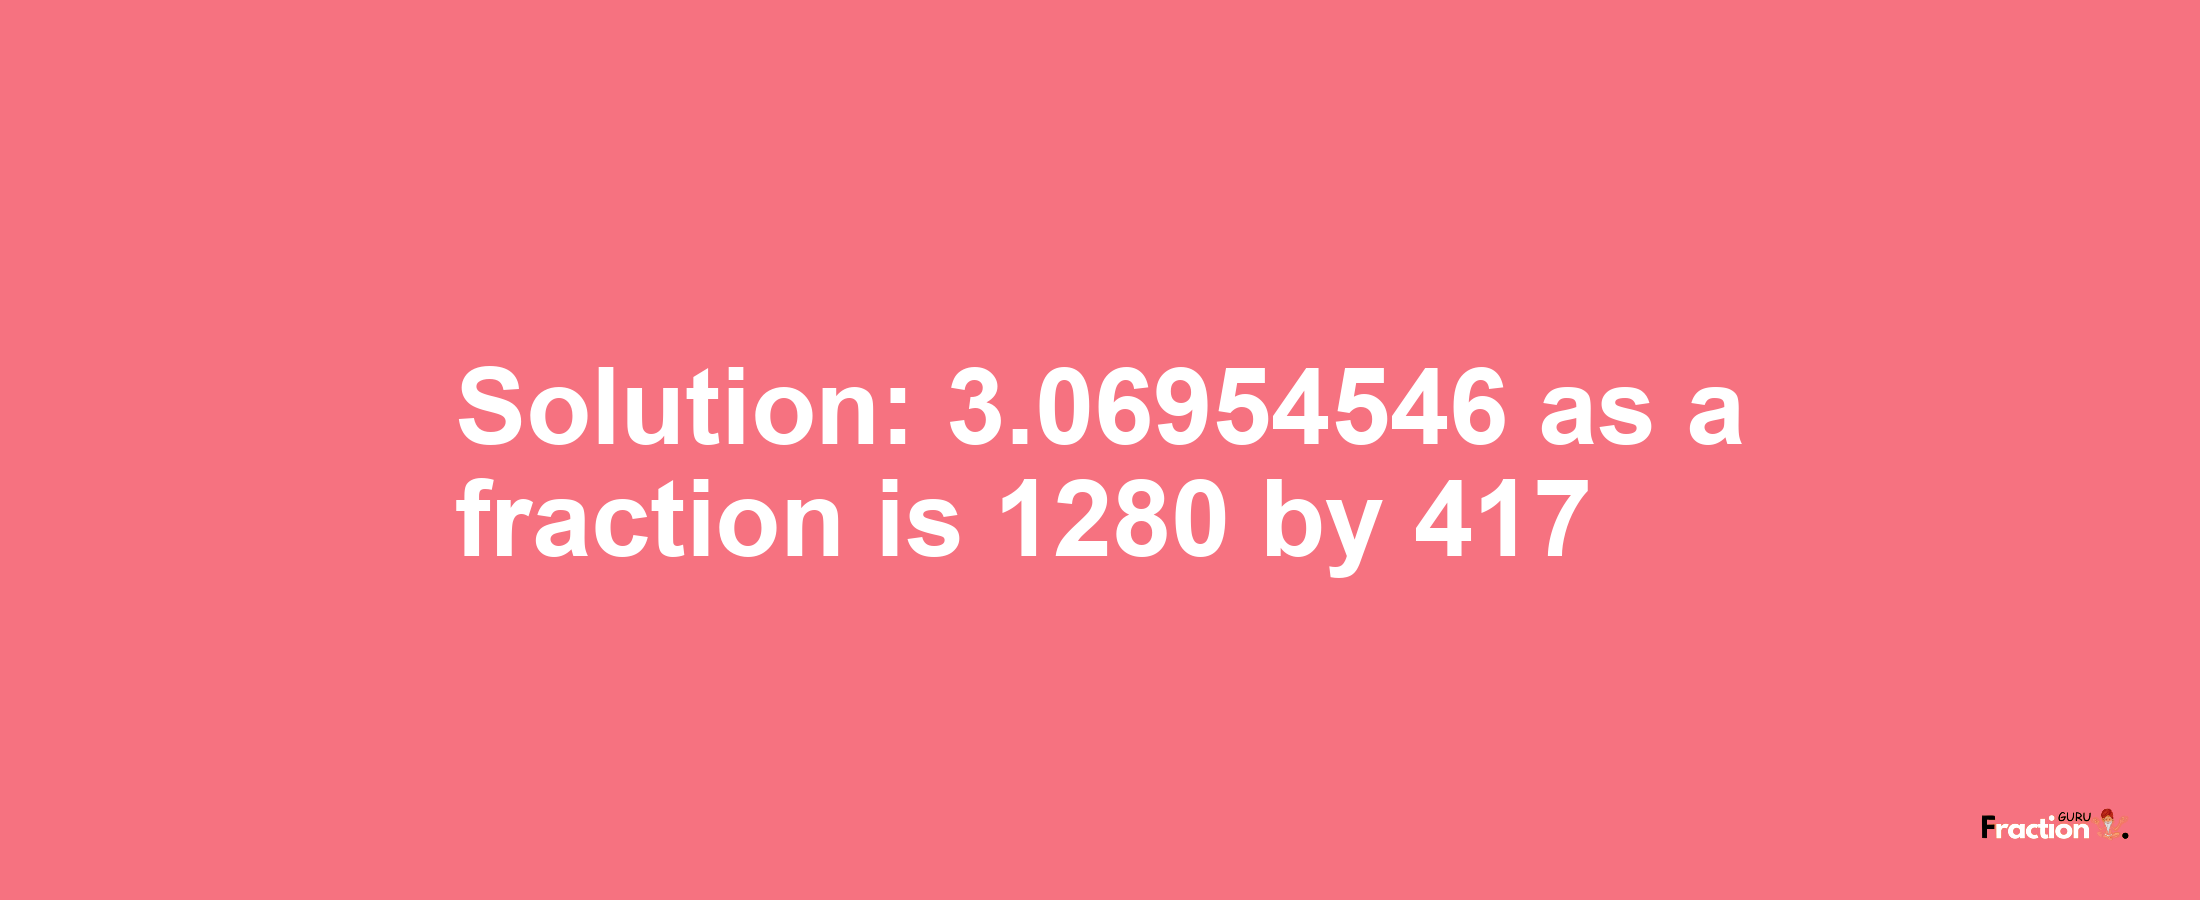 Solution:3.06954546 as a fraction is 1280/417